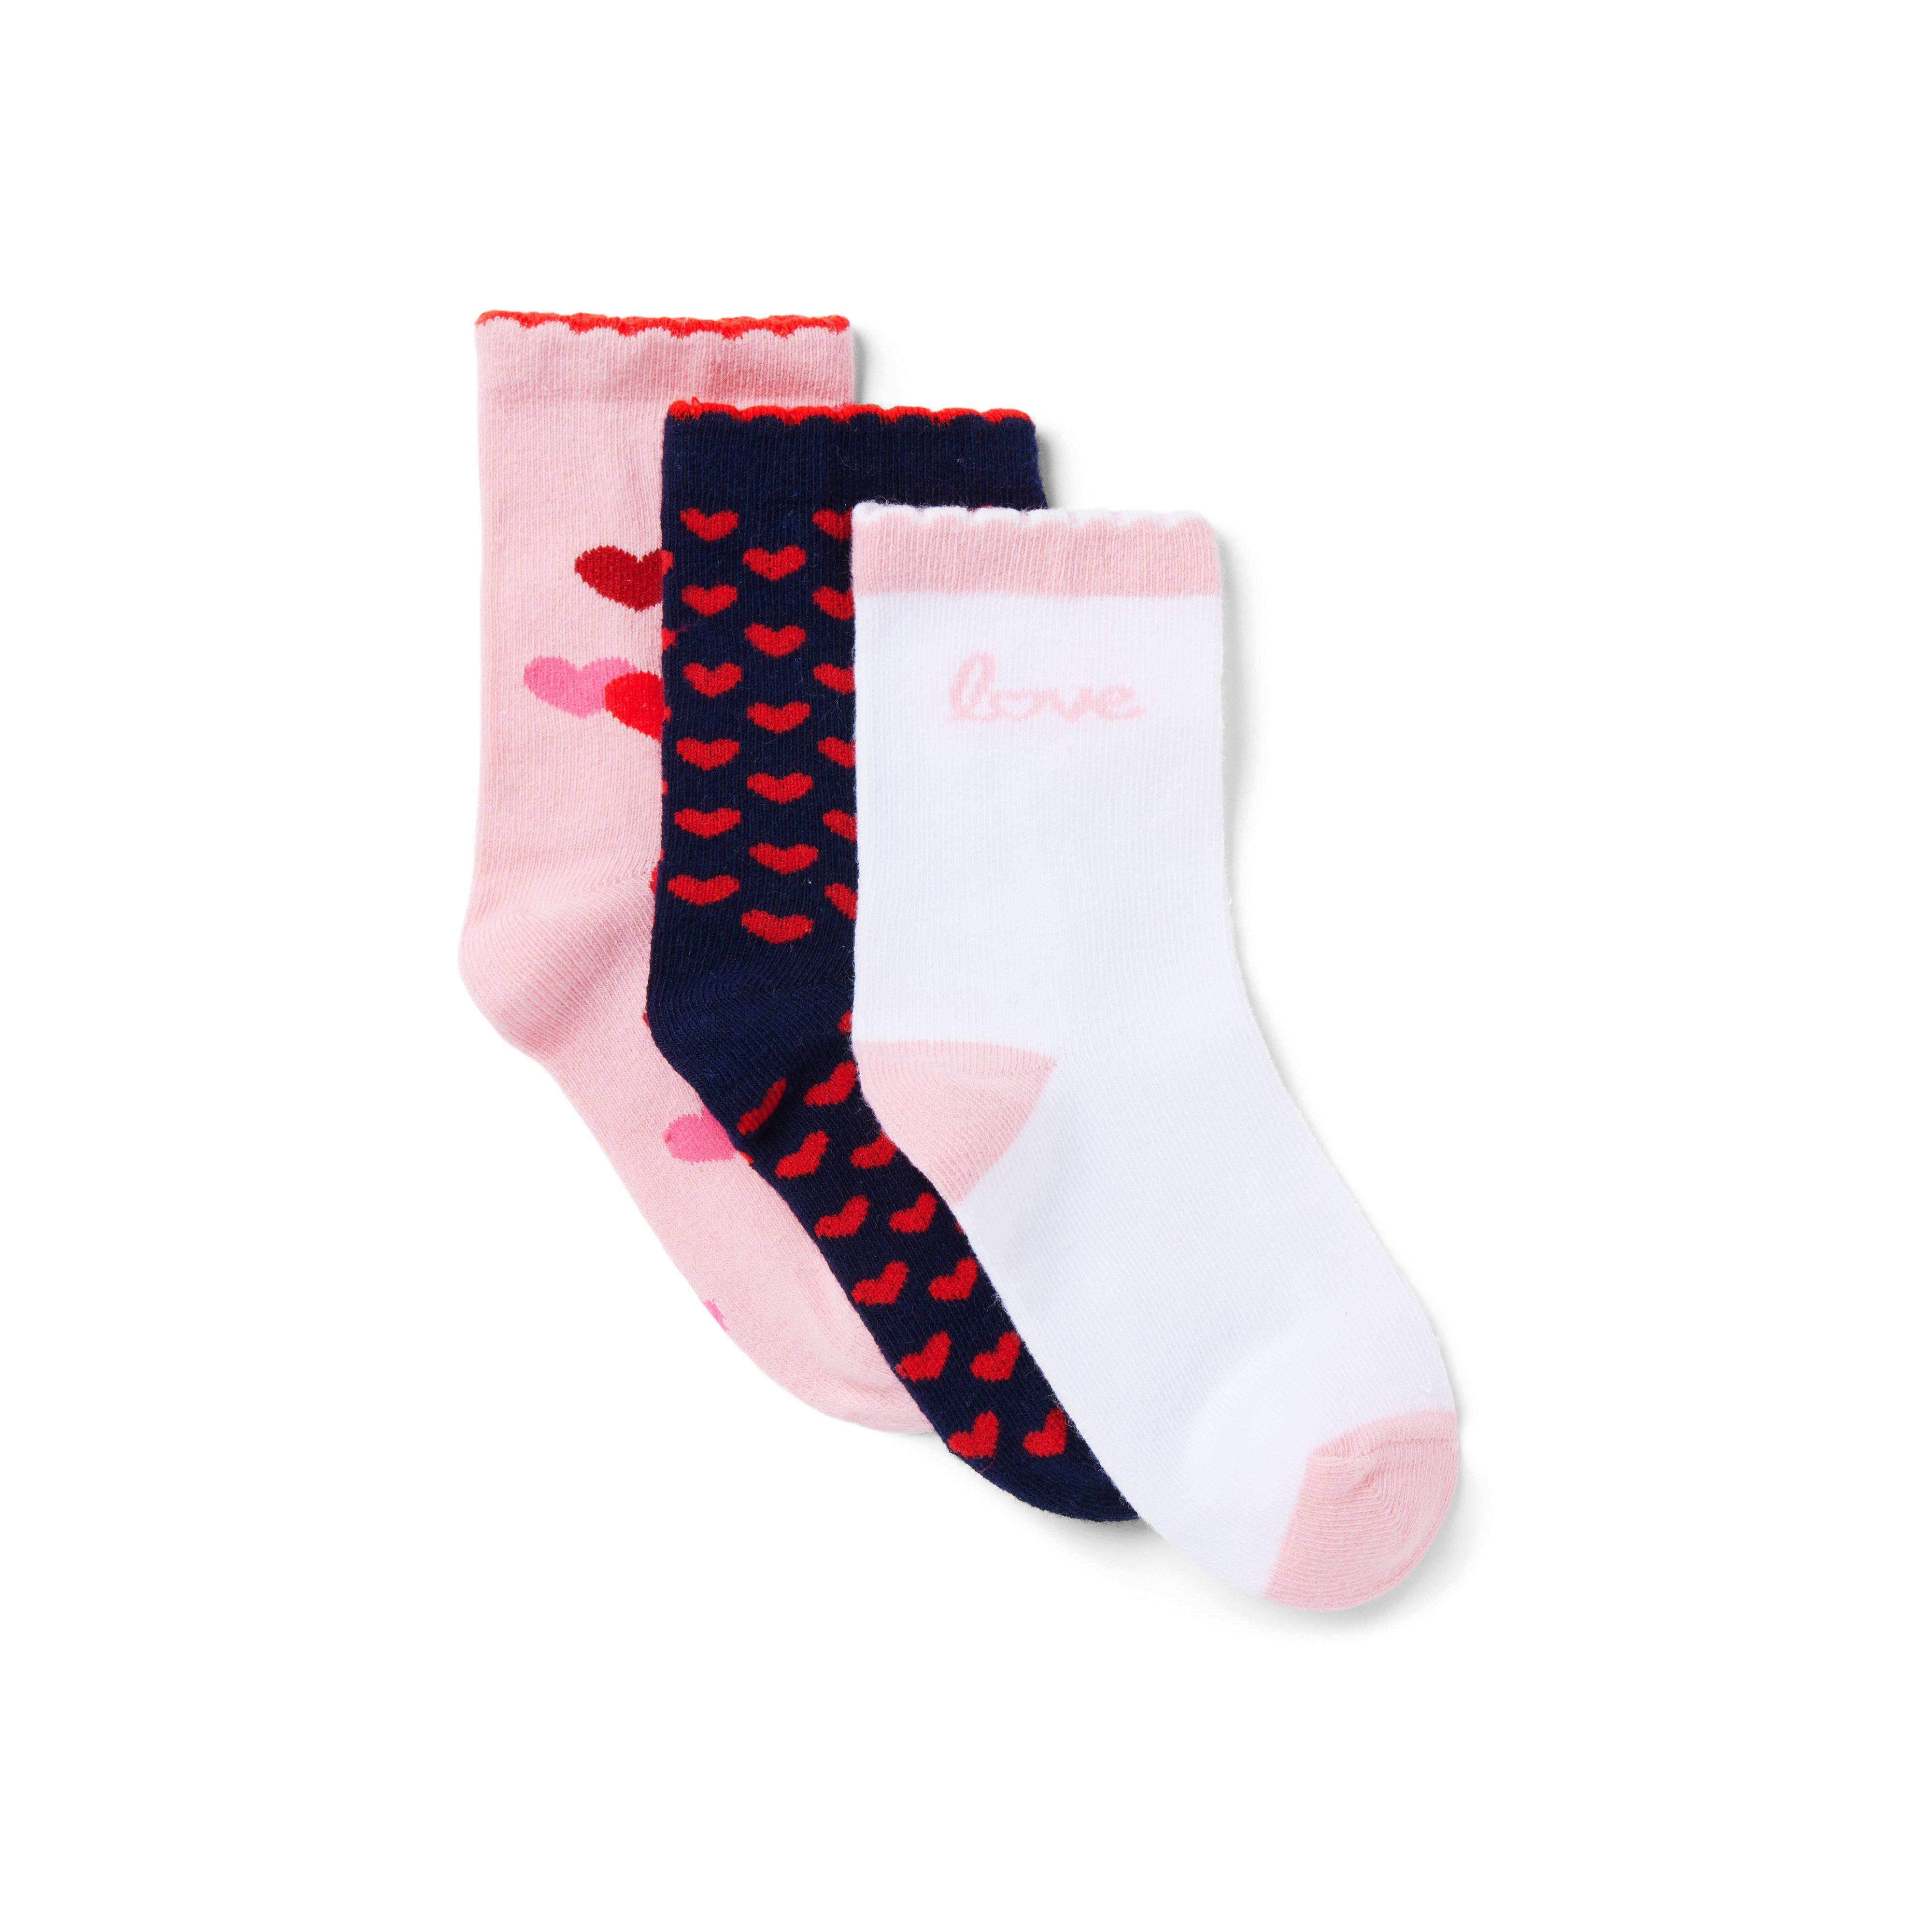 Girl Candy Pink Heart Valentine Sock 3-Pack by Janie and Jack